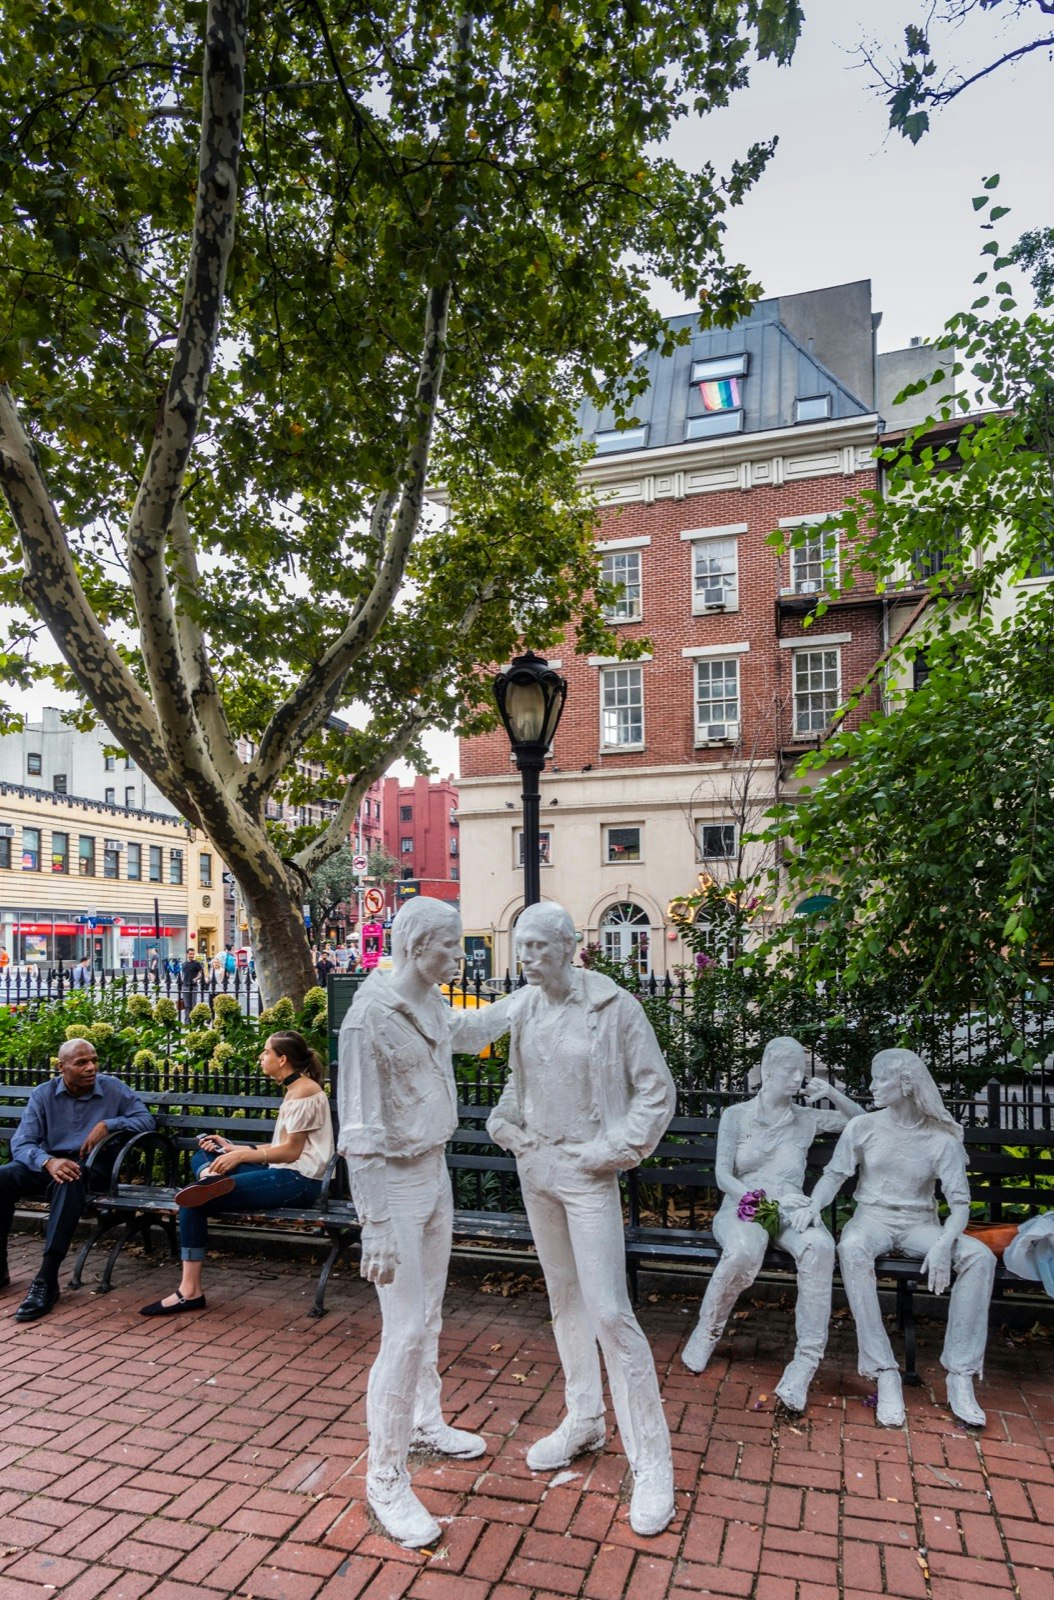 The Stonewall Riot Monument shows four white statues, two standing and two sitting, in a park in New York City. NYC WorldPride will celebrate the 50th anniversary of the Stonewall Uprising. A man and woman sit on a park bench in the background. 